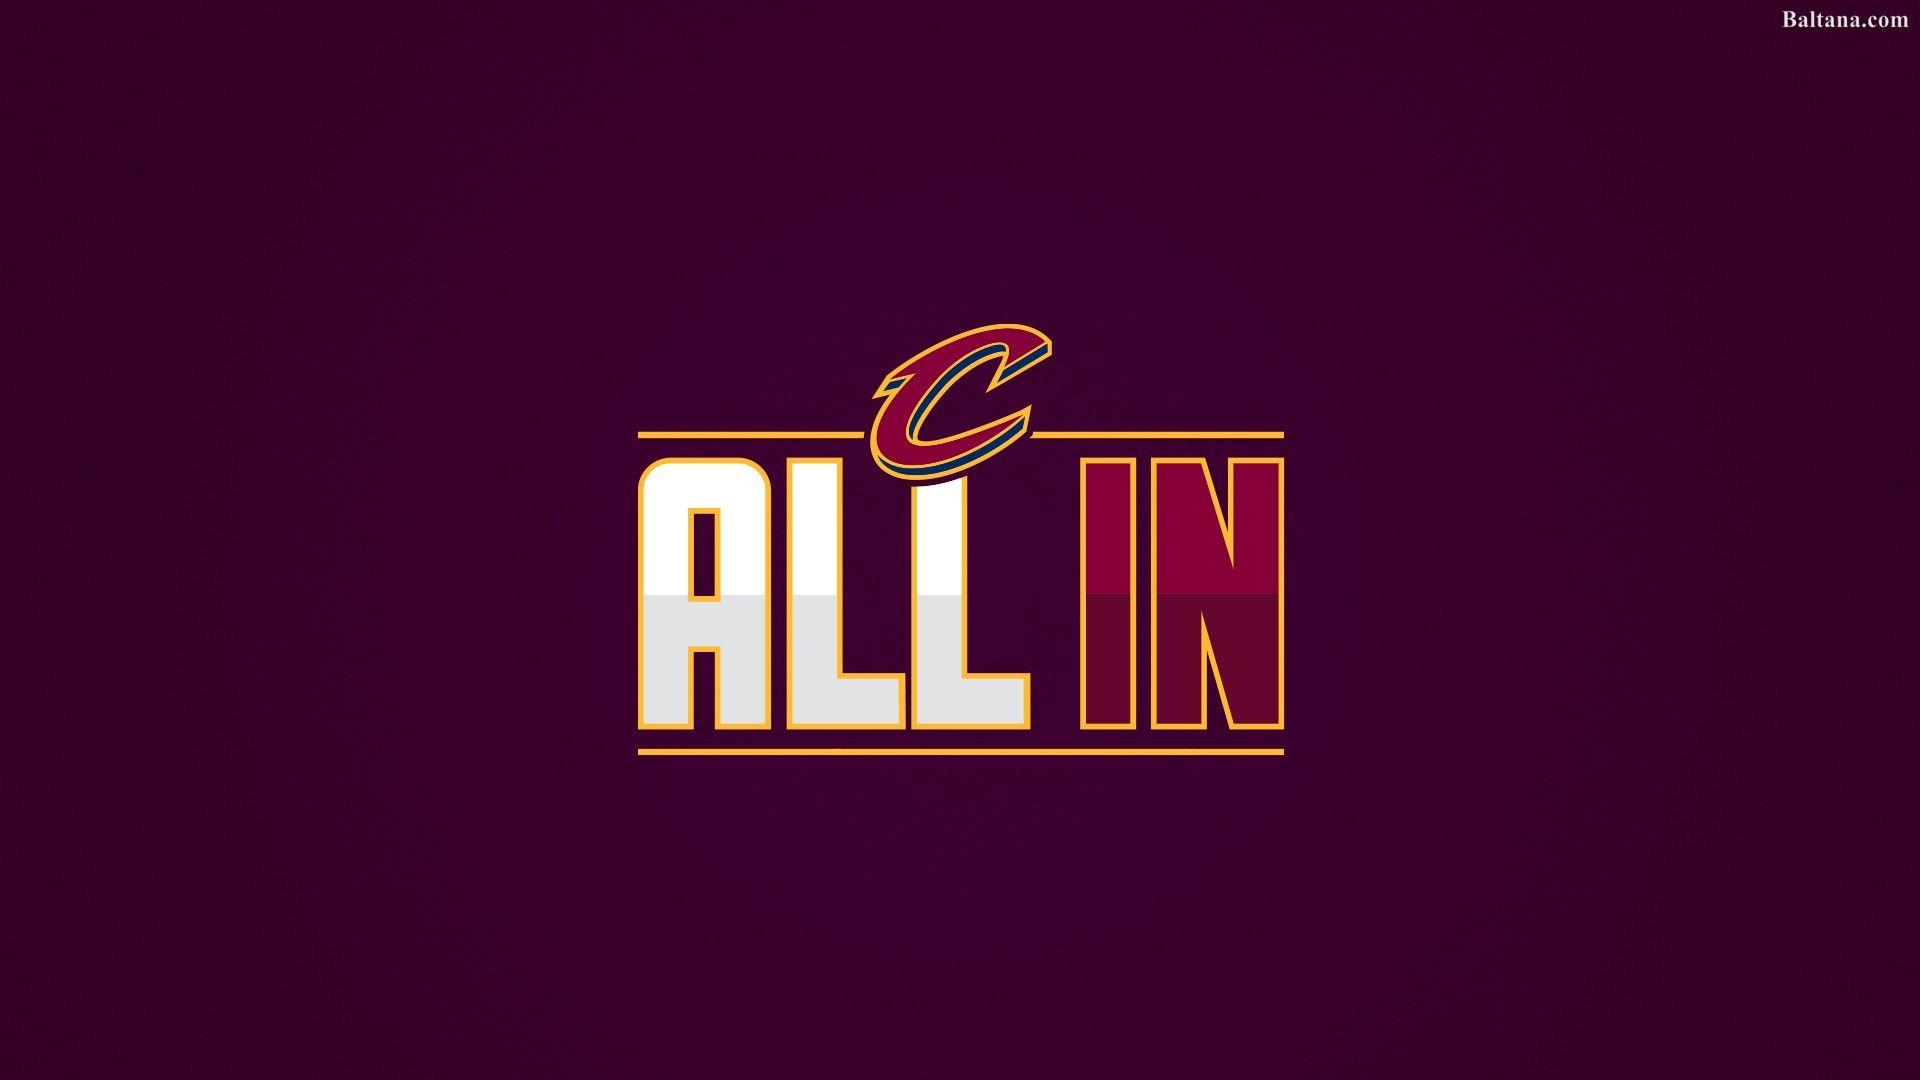 Cleveland Cavaliers Backgrounds 2K Wallpapers